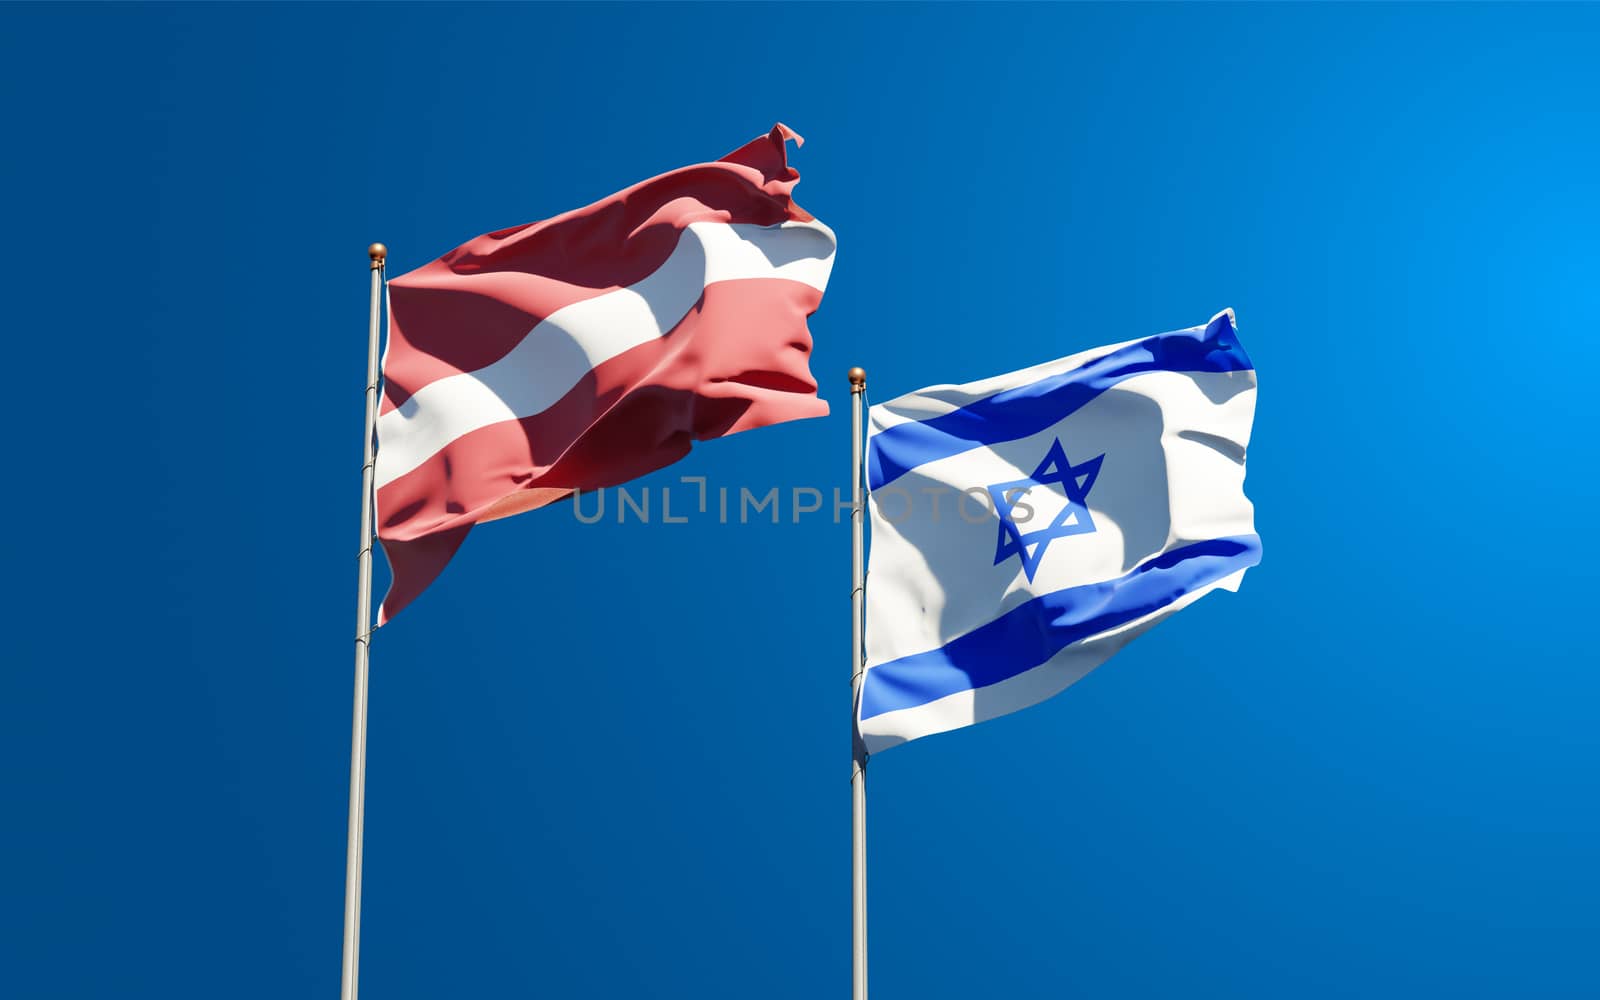 Beautiful national state flags of Latvia and Israel together at the sky background. 3D artwork concept.